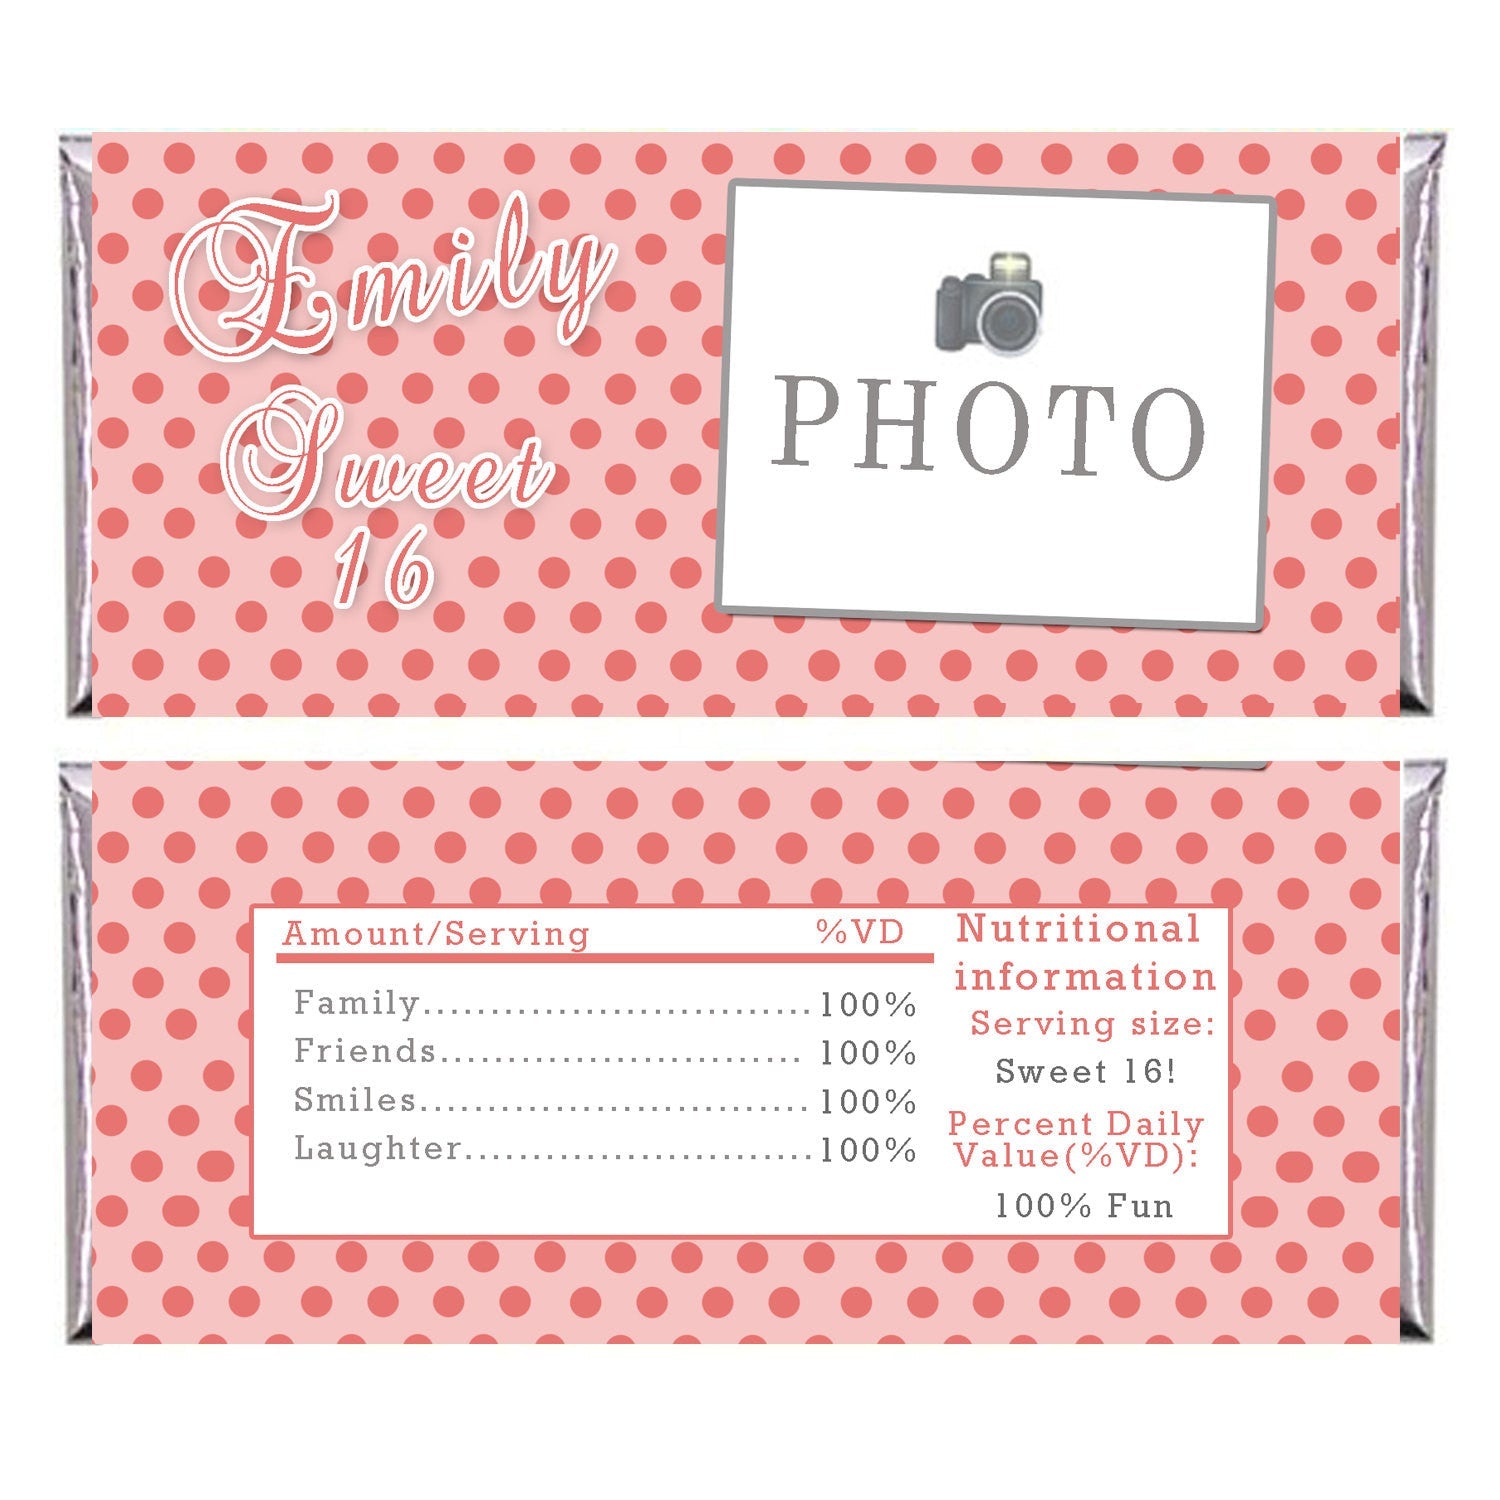 Candy bar label quinceañera favors with picture